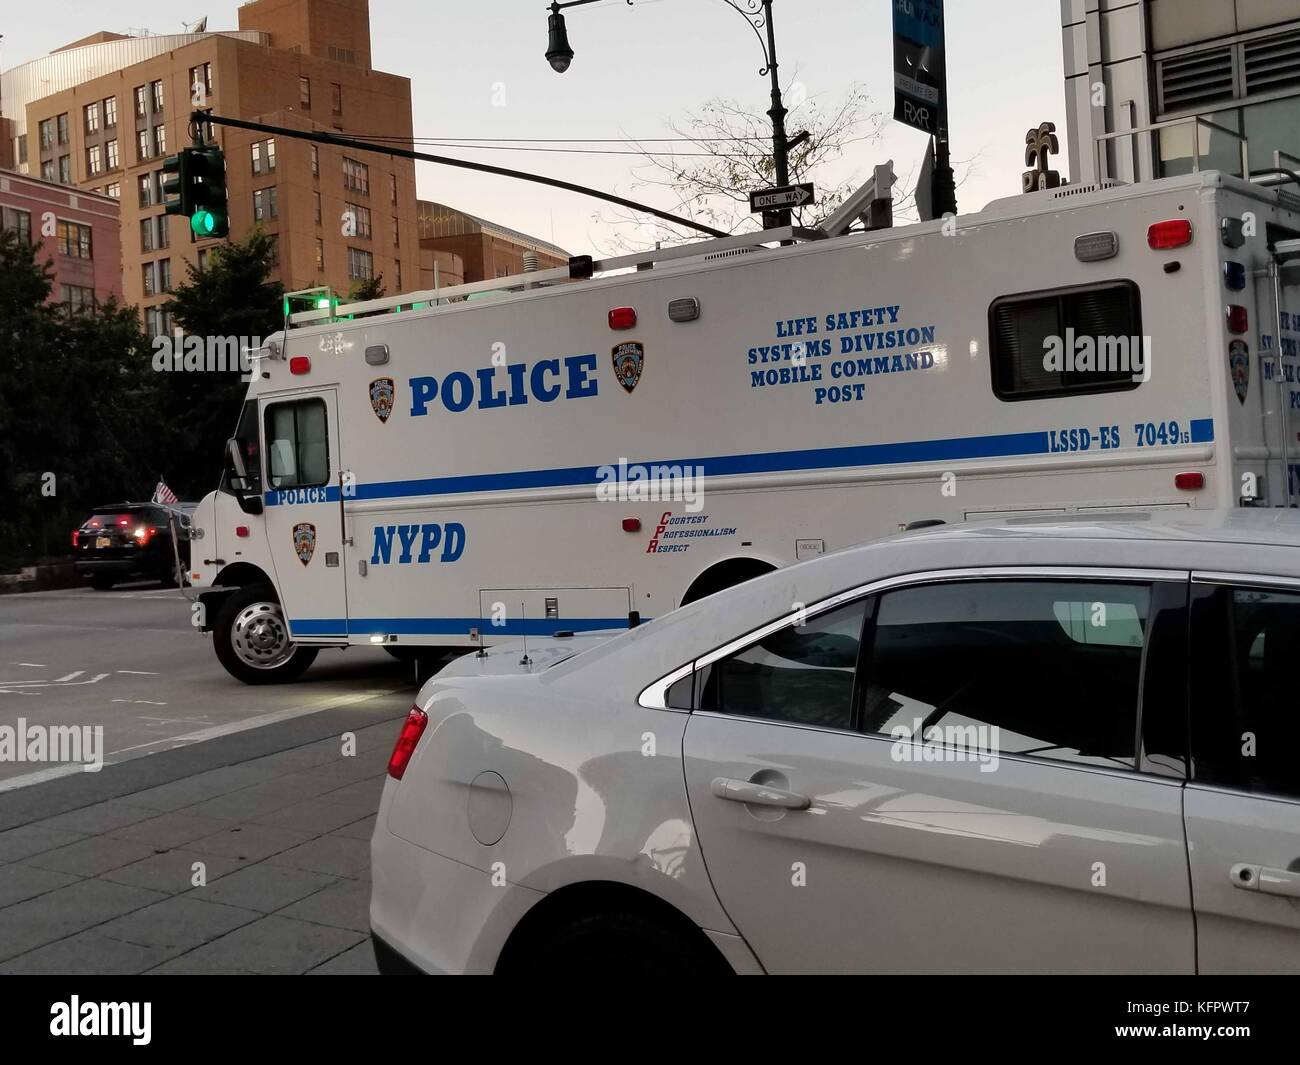 New York City, USA. 31st Oct, 2017. Police, Fire, Bomb Squad, and Homeland Security forces surround area where a terrorist attack occured in NYC. A driver kills several people in a rental truck in New York City, October 31, 2017. It has been reported suspect was caught alive by police after driving a rental truck on a popular bike path along the Hudson River in the Tribeca neighborhood. Credit: Brigette Supernova/Alamy Live News Stock Photo